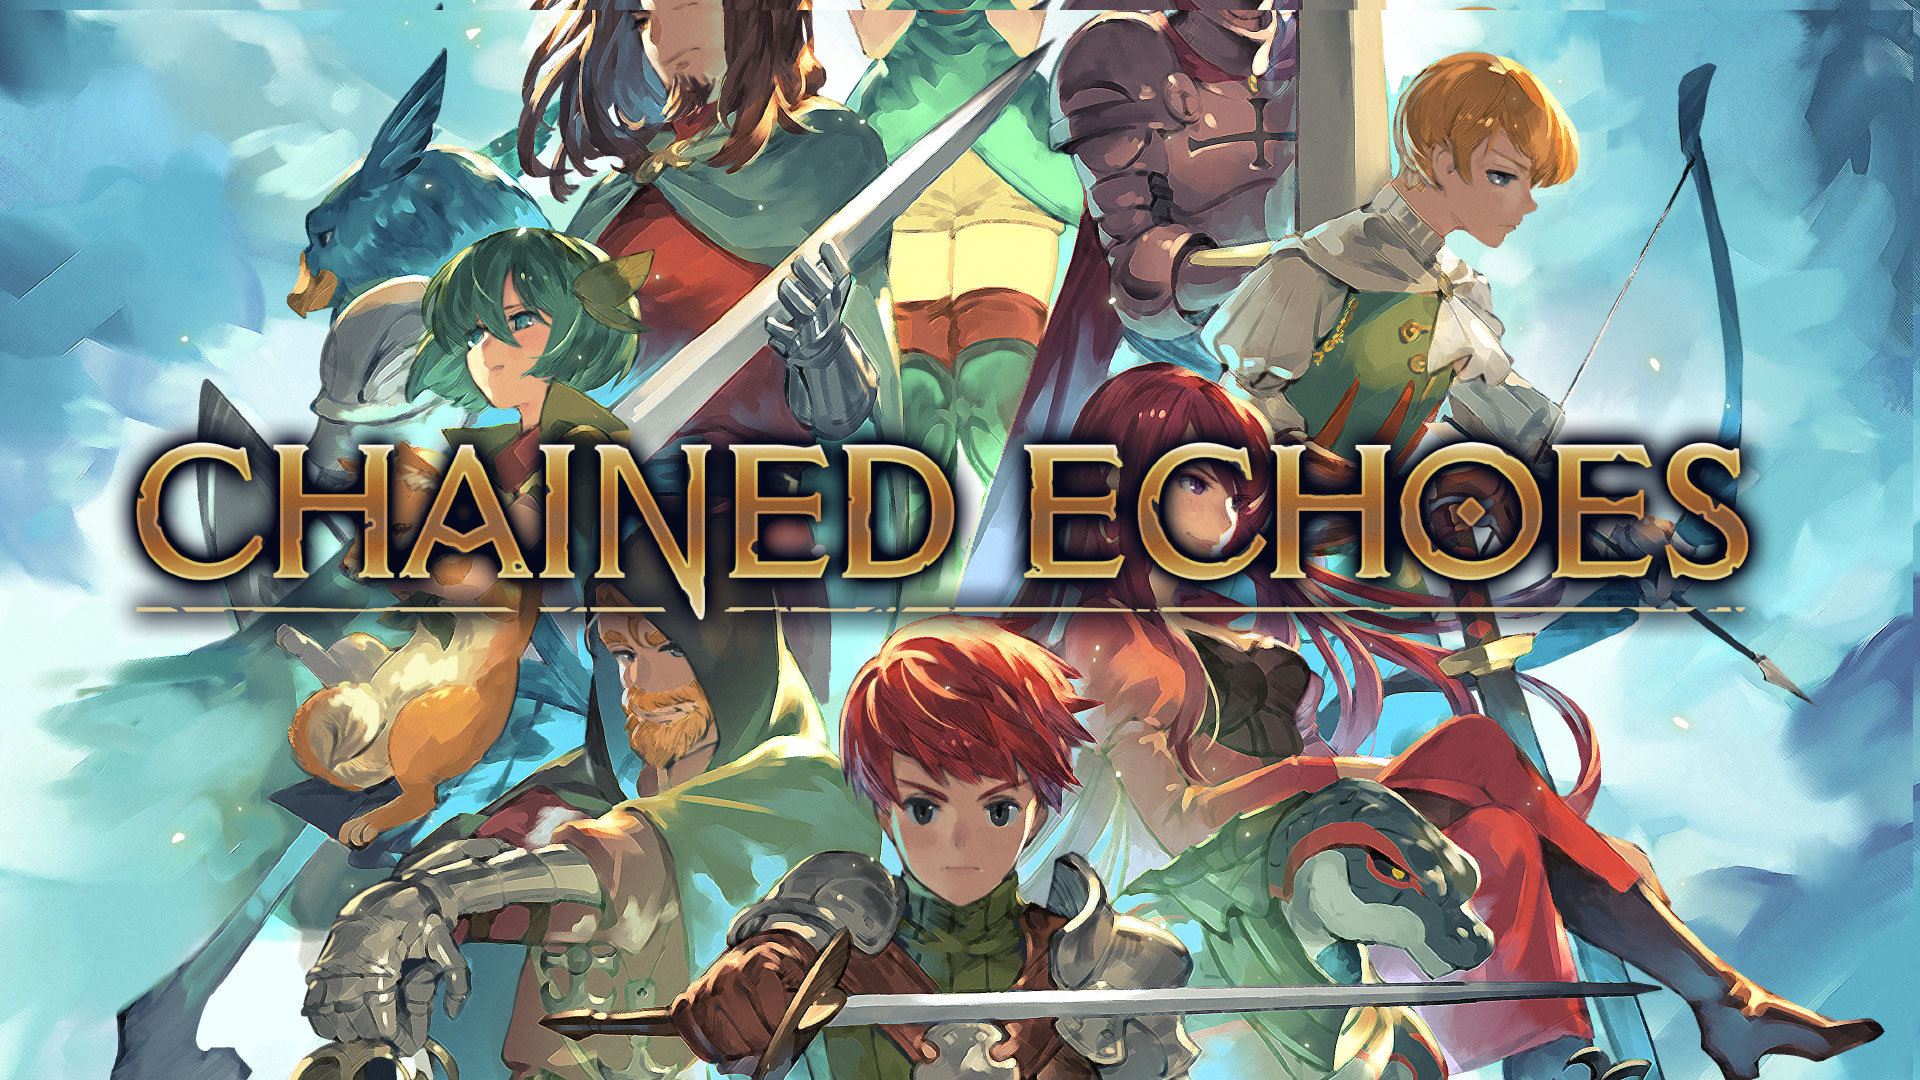 Chained Echoes - Available now, good reviews, game pass 16 bit style RPG -  Discussion - rllmuk